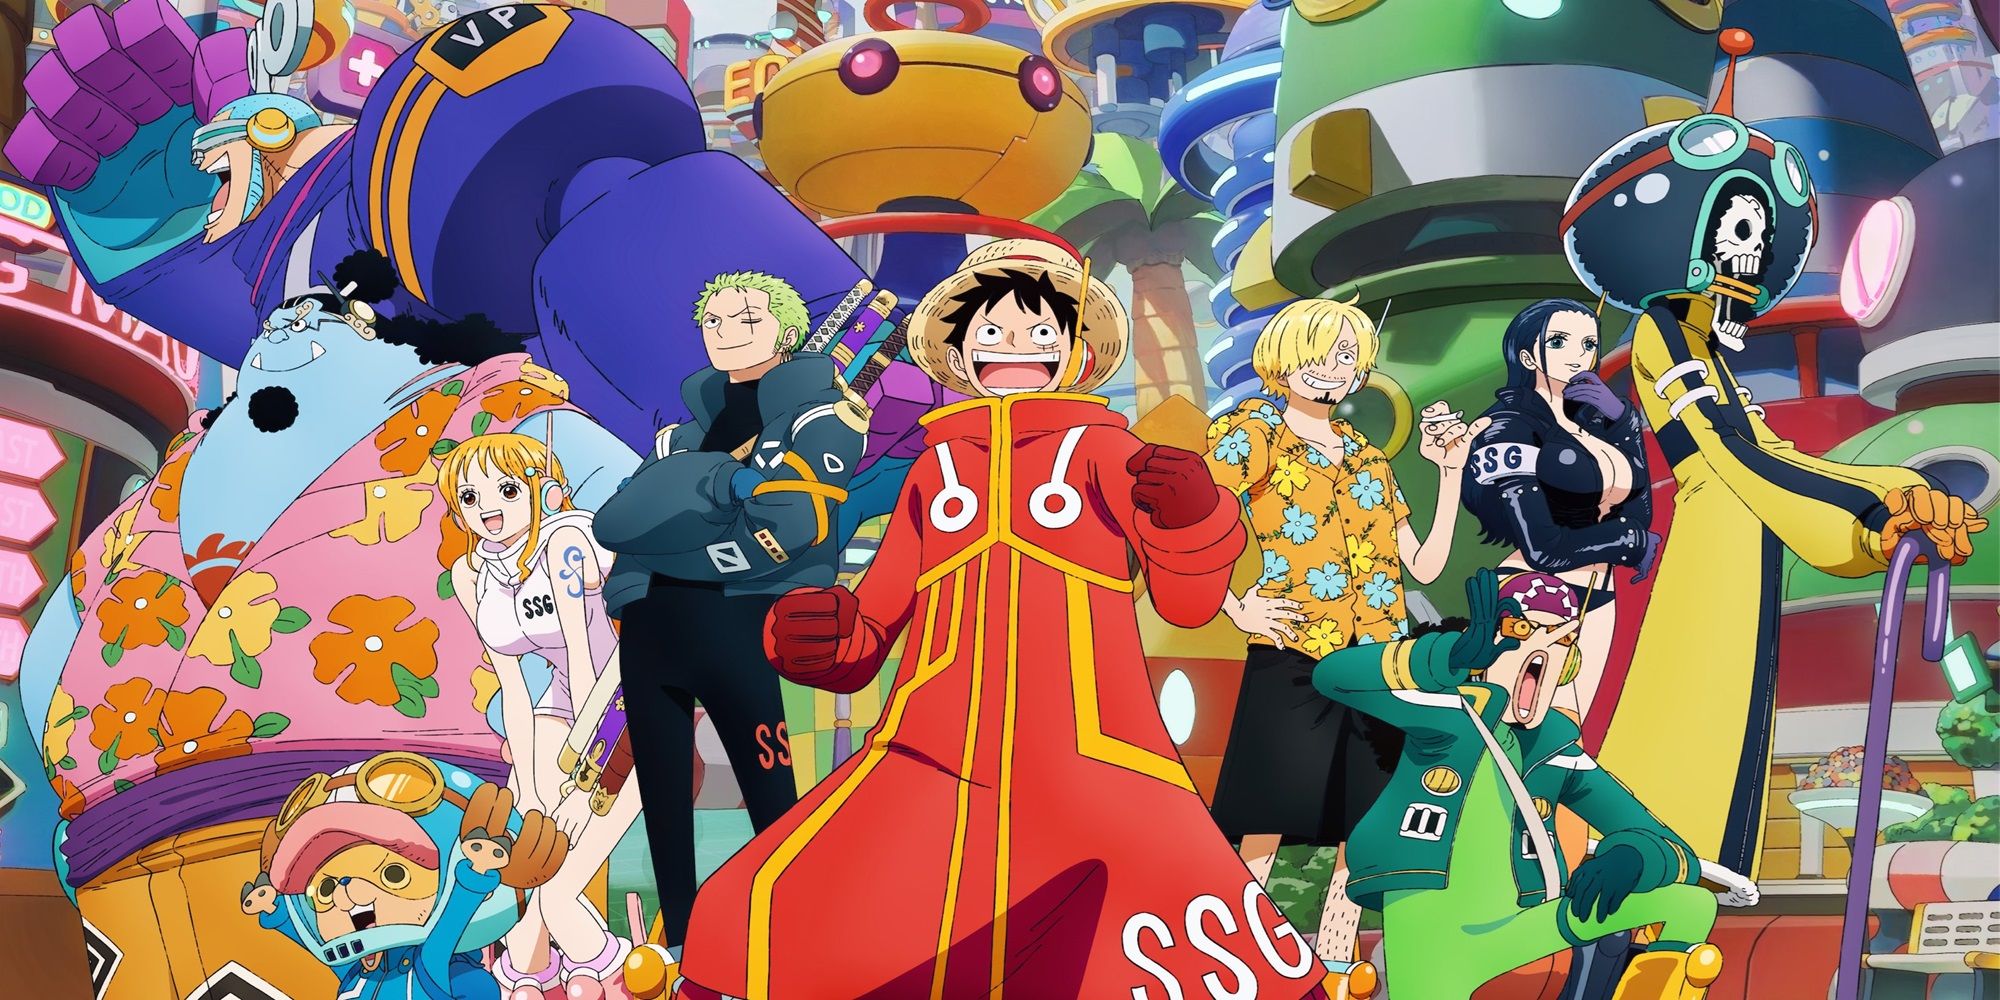 One Piece's Egghead has its official debut